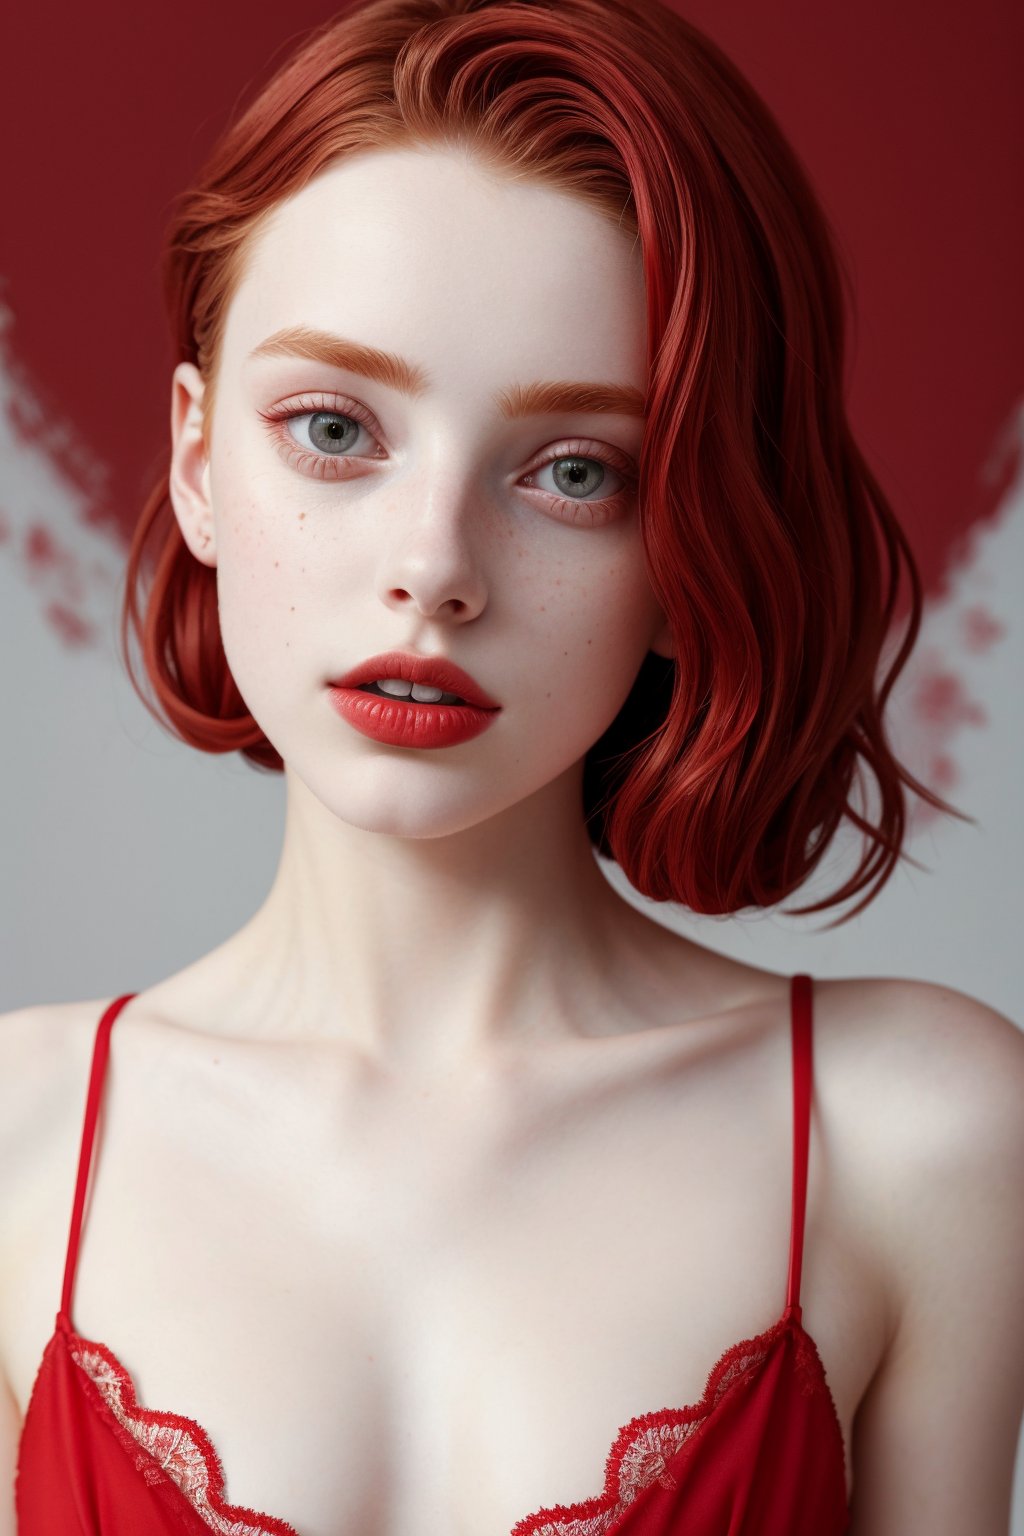 (masterpiece, high quality, fisheye:1.2), (close-up portrait:1.1), solo, model photoshoot, (red theme:1.1), a stylish girl, red hair, silver eyes, red lipstick, red eye shadow, blush, (freckles:0.7), (european, 22 years old:1.3), sexy, pure innocence, (light smile:0.8), whore vibe, in love, simple red dress, cleavage, detailed natural skin texture, seductive gaze, detailed lighting, (red:1.1) wall background, shallow depth of field, romantic setting, dreamy pastel palette, whimsical details, captured on film, nsfw, (intricate details:0.5)